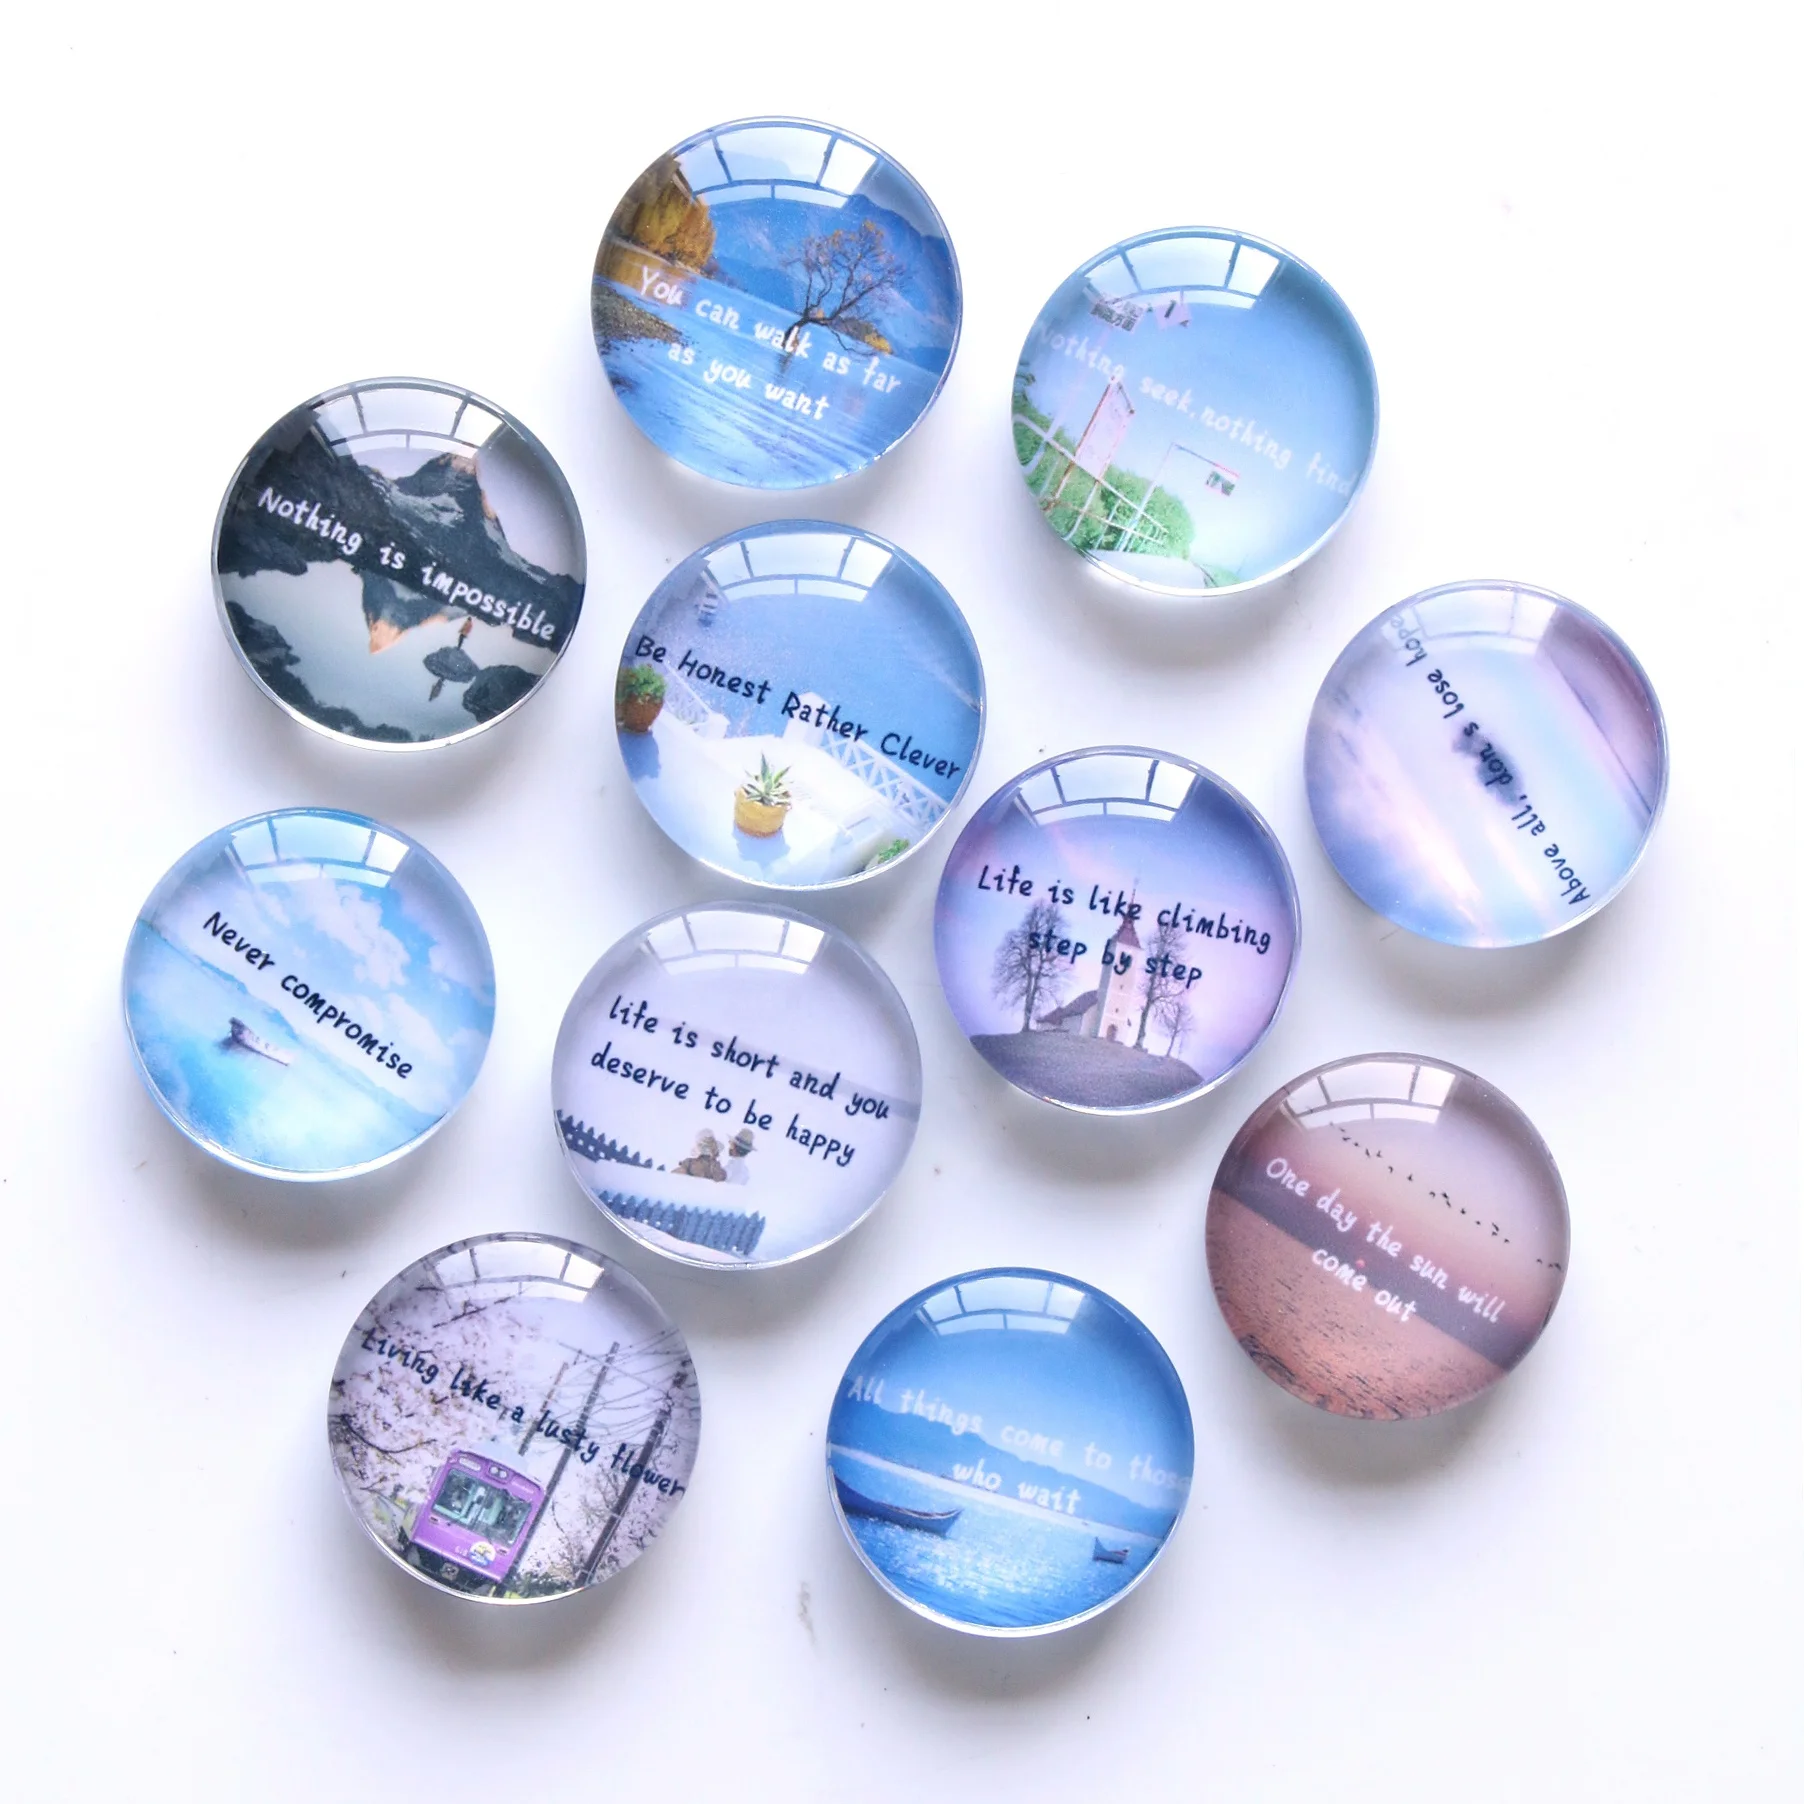 

New Product Inspirational Refrigerator Woeds Magnets 30mm Positive Quote Round Glass Fridge Magnets For Kitchen Home Decor